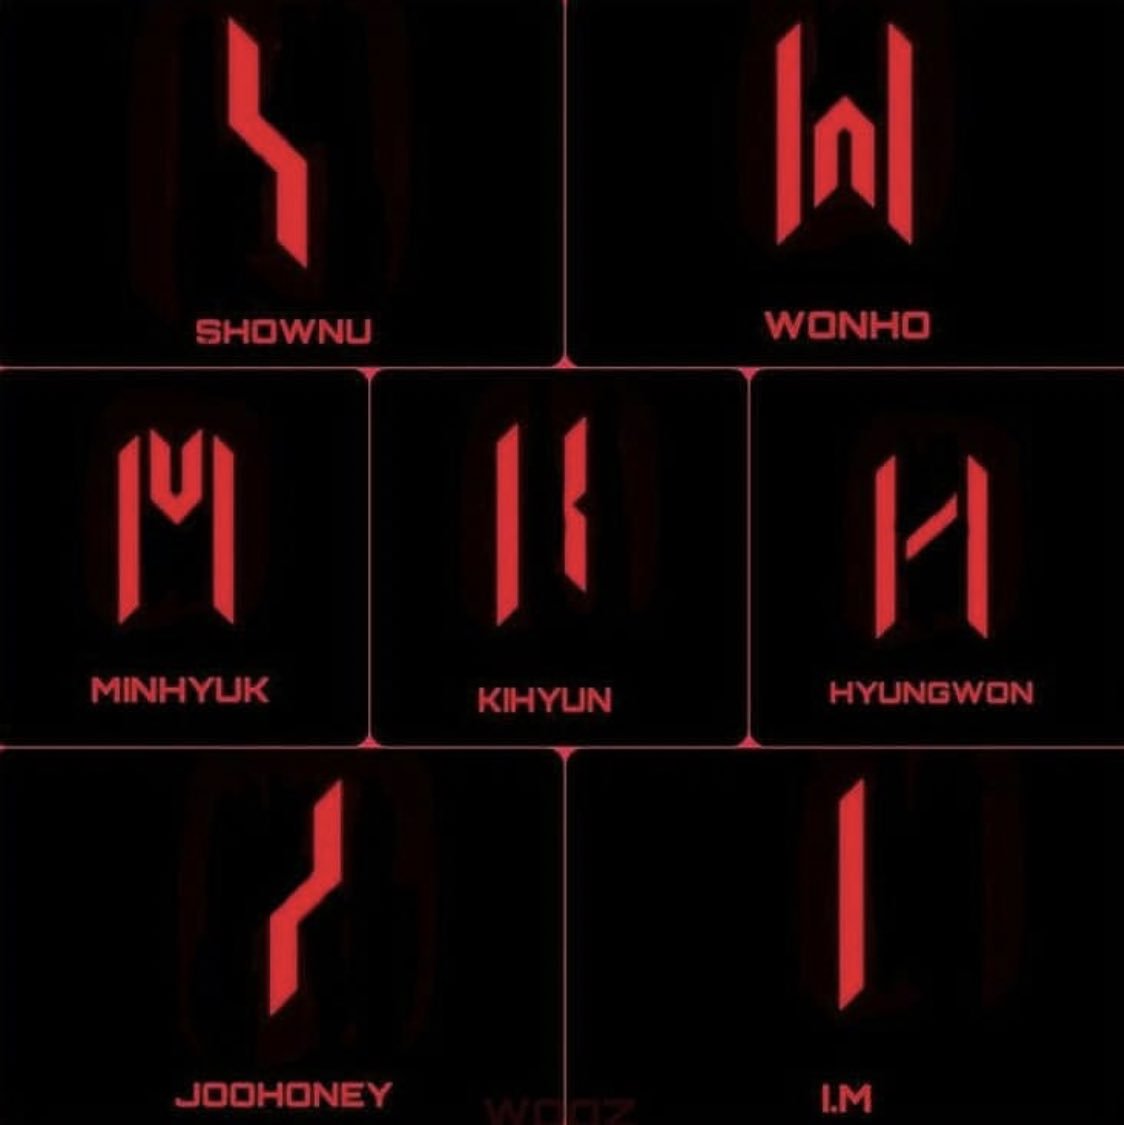 7 months later I'm adding to this thread to say the image on the left is fanmade.I can't find the original tweet because it was a long time ago but this was never shared by MX.This font was also never used, they only use Helvetica Ultra Compressed for this version.